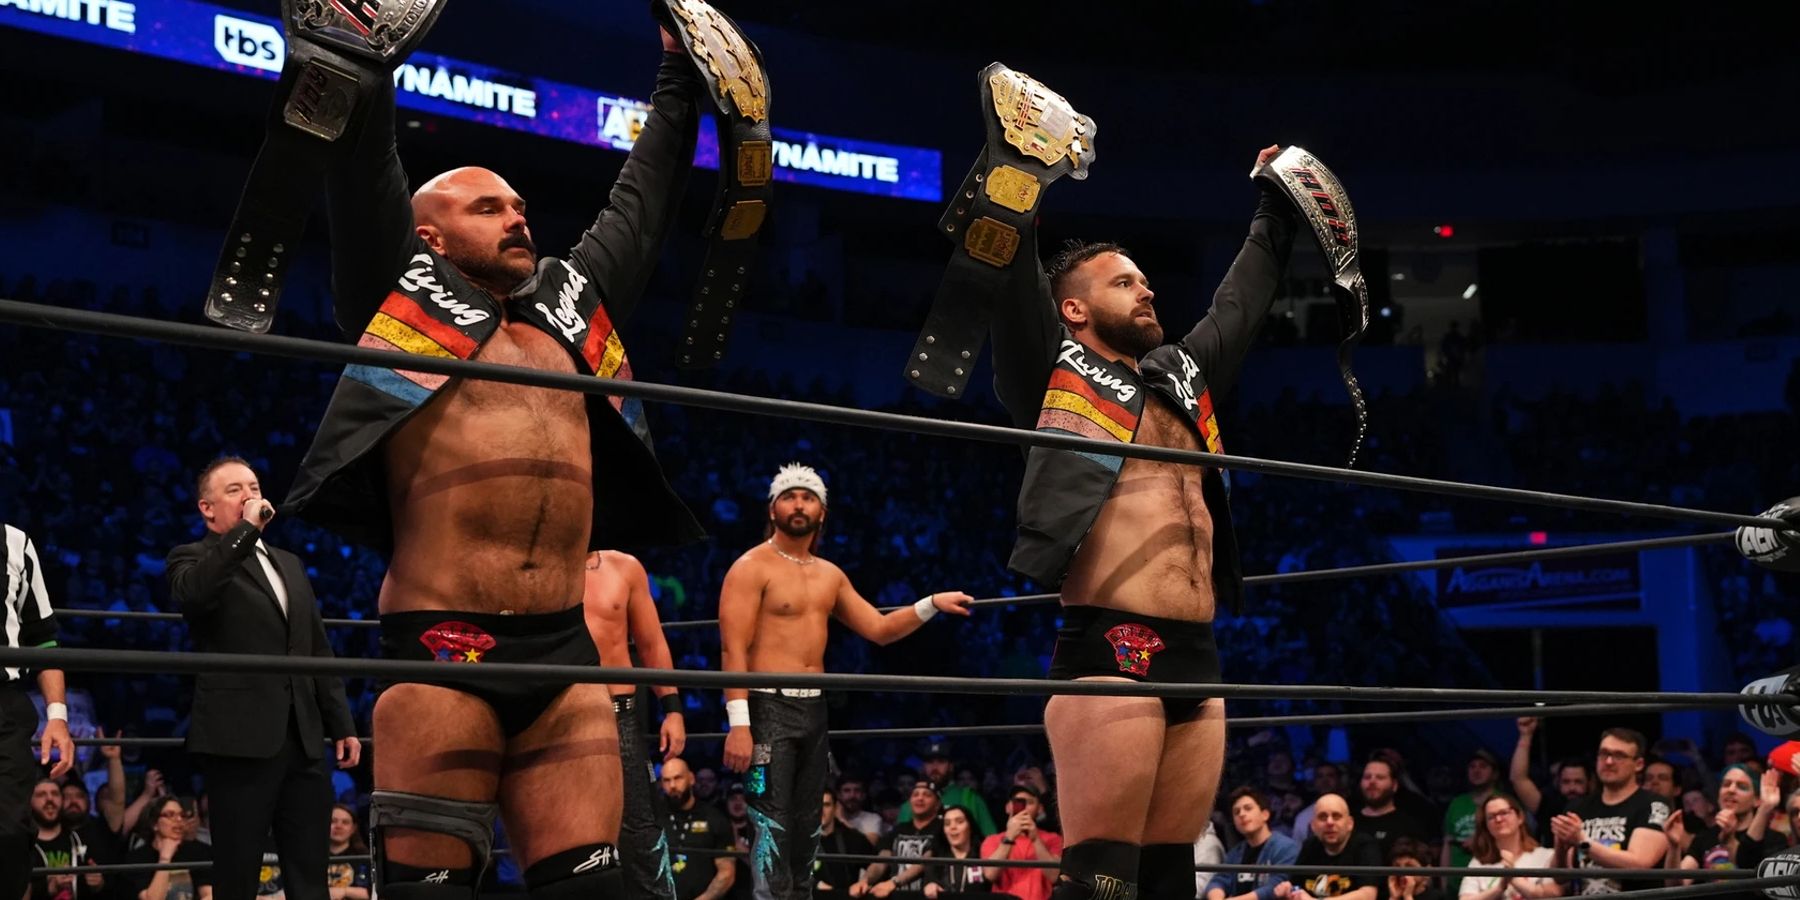 FTR make their entrance before putting on an instant classic against The Young Bucks on AEW Dynamite in 2022.